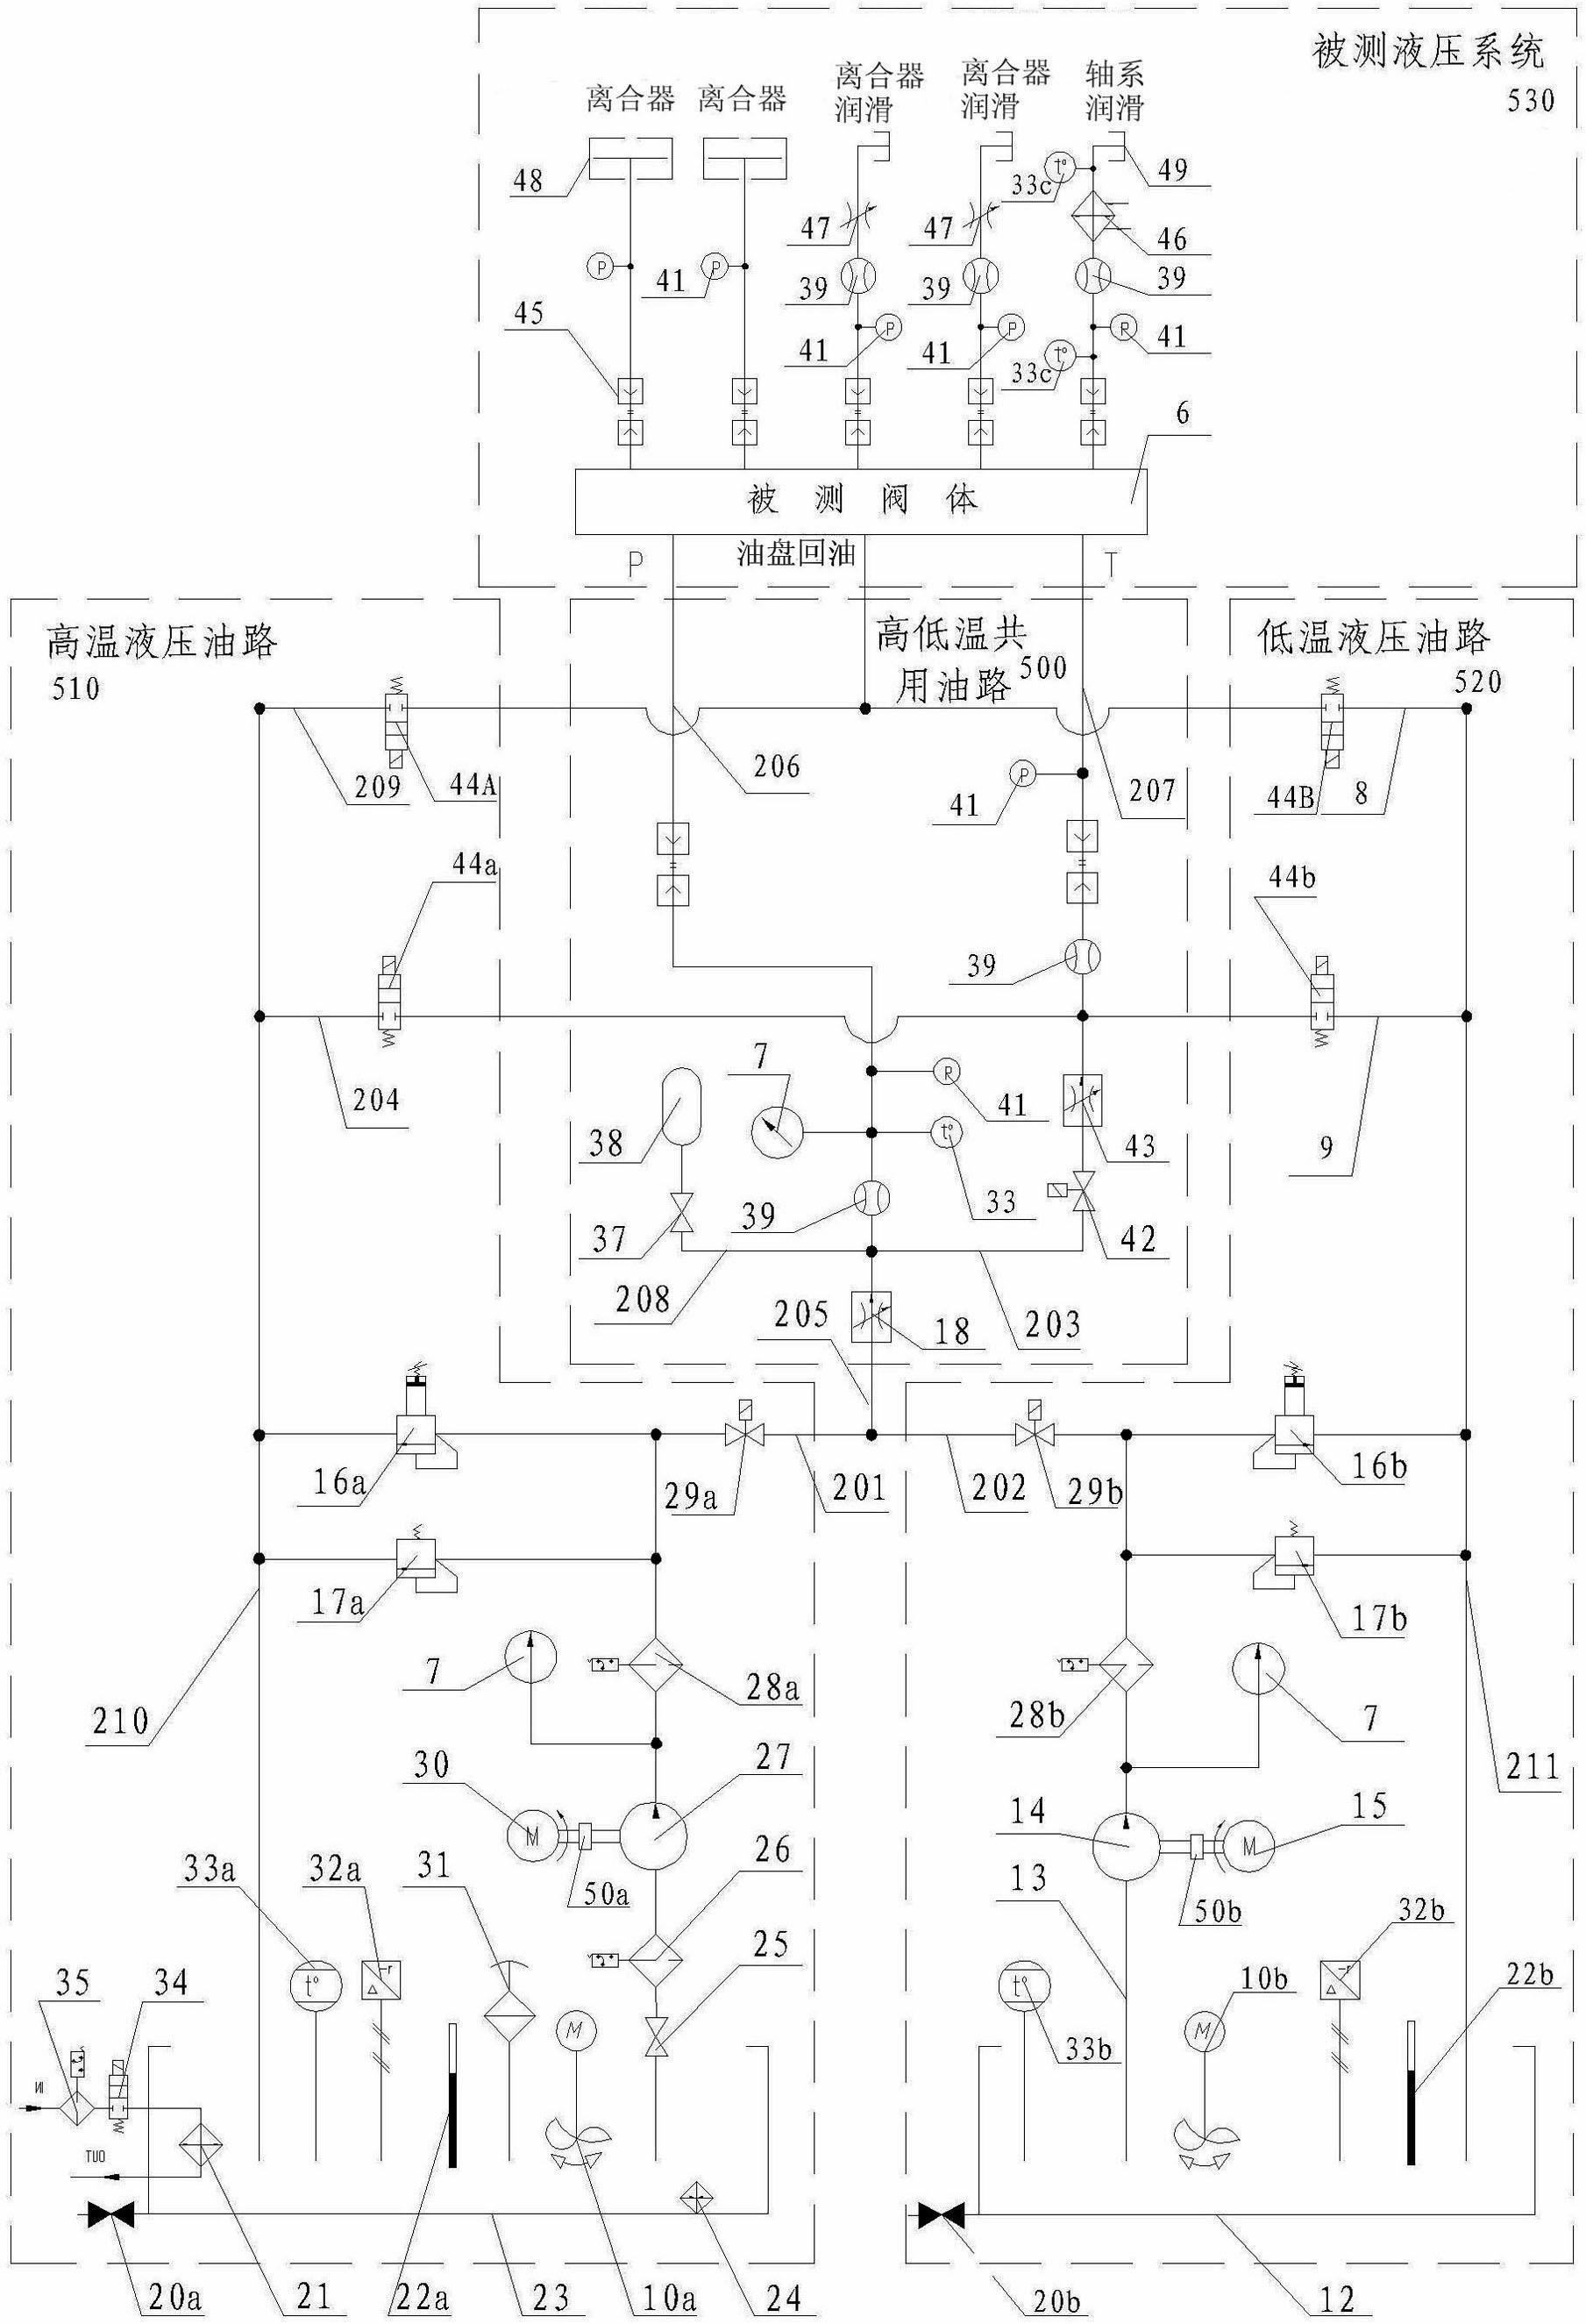 Hydraulic control loop of high/low-temperature test bed for automatic transmission valve